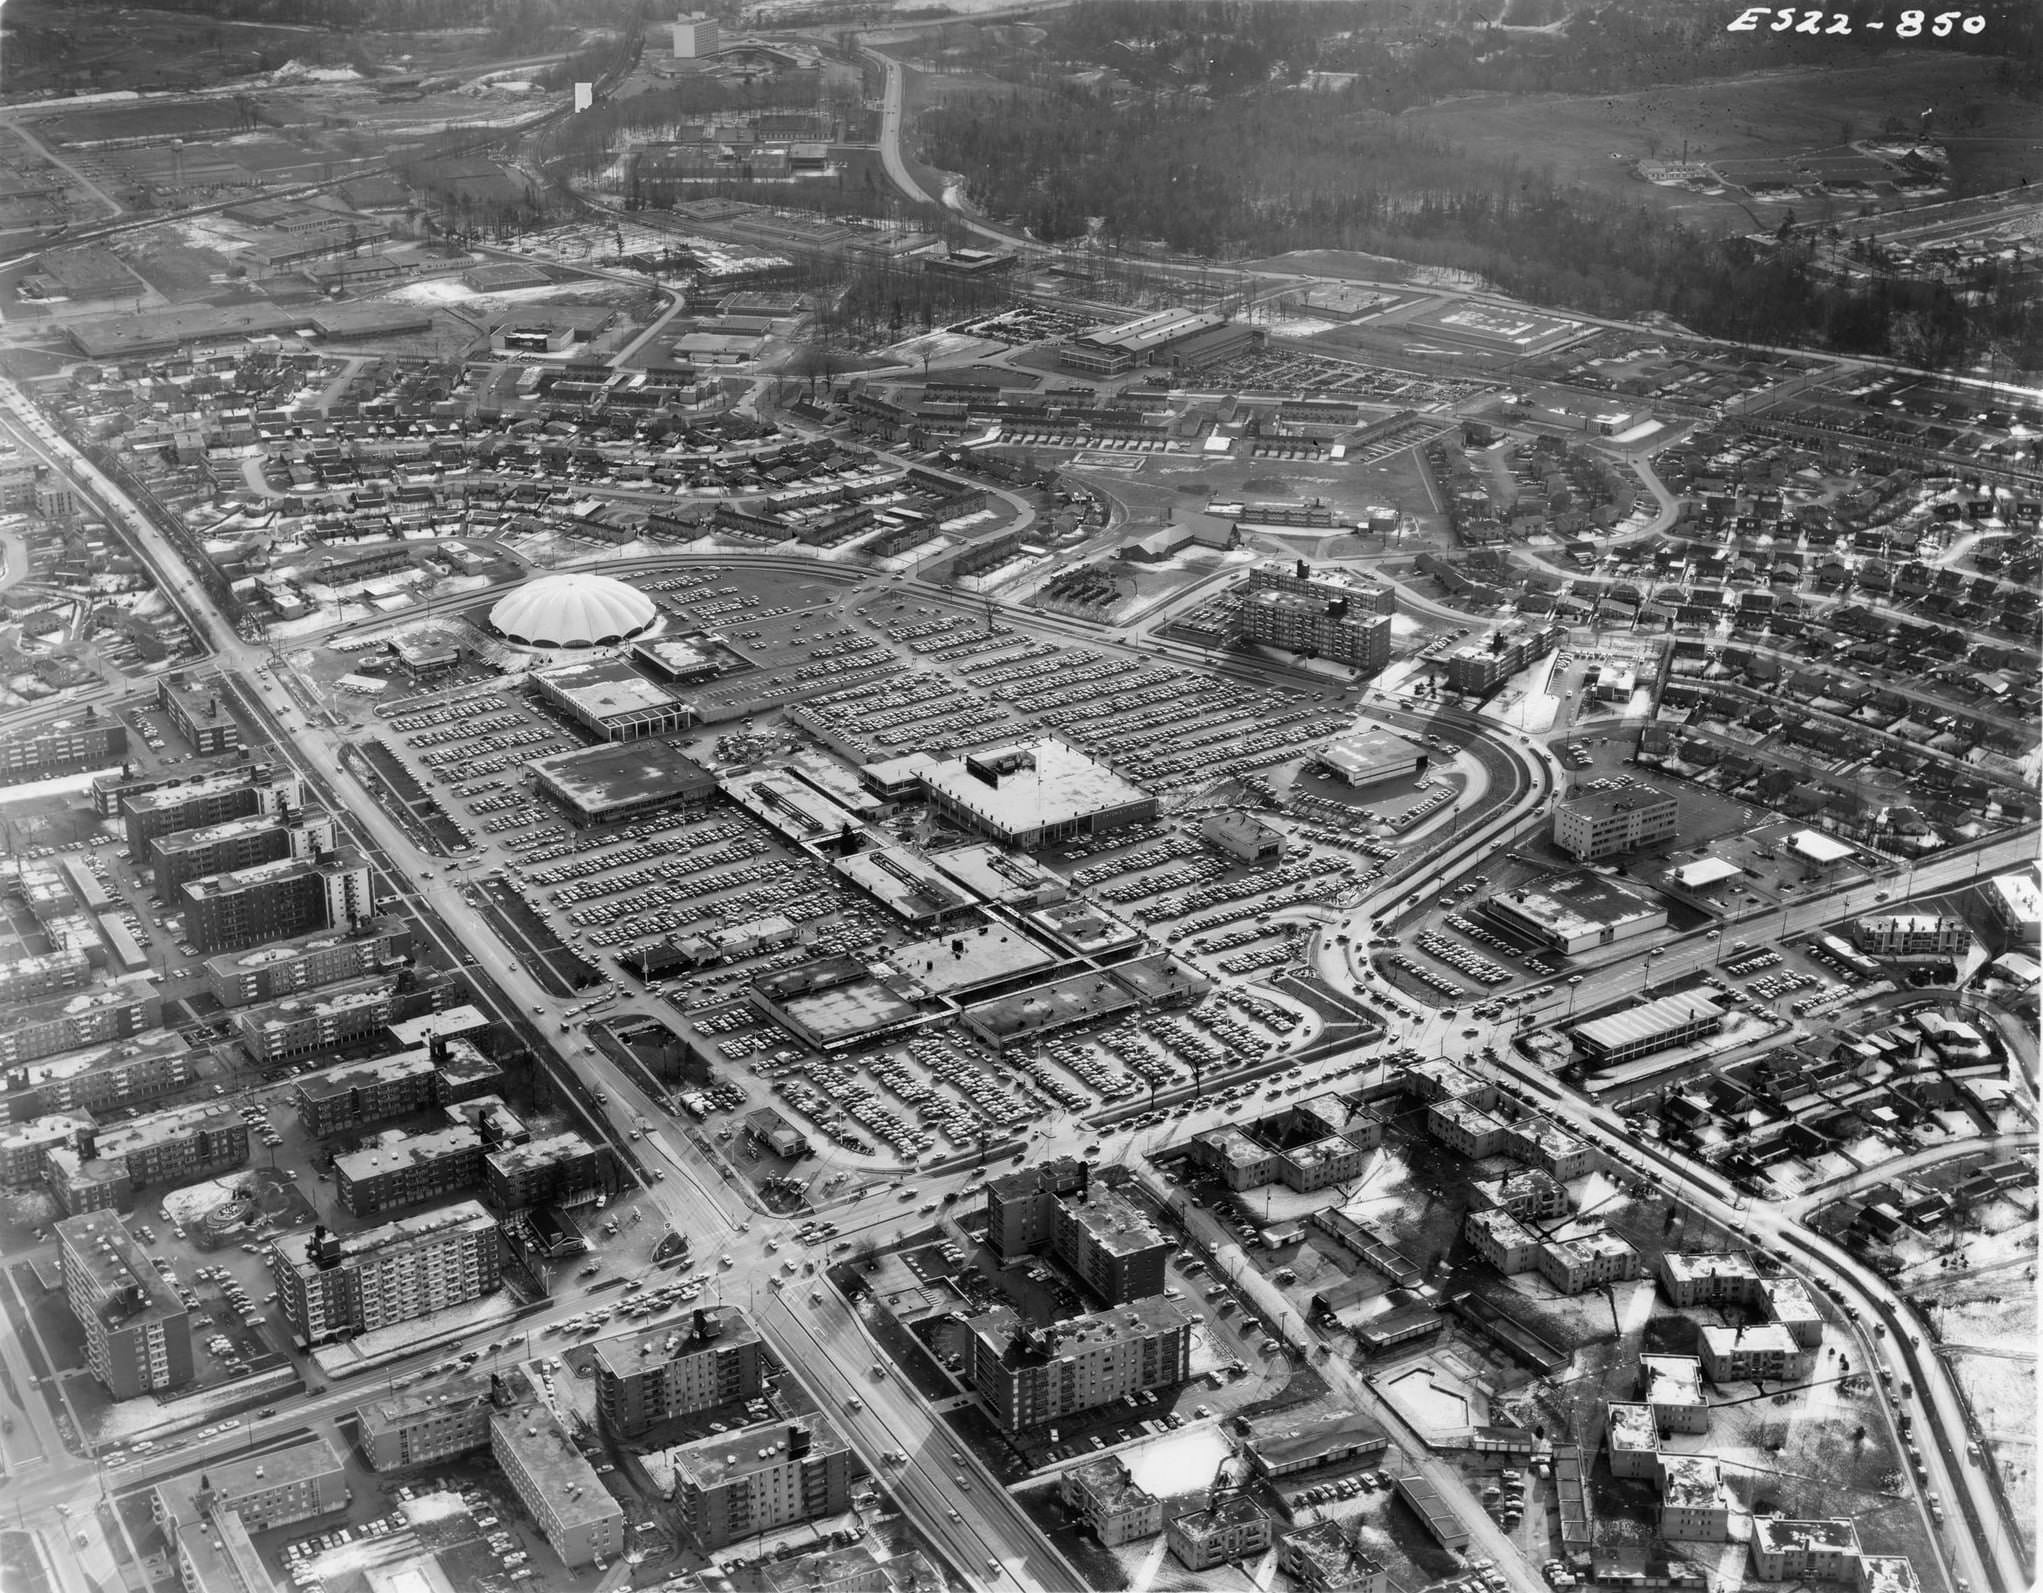 A Lockwood Survey aerial photograph of Don Mills, 1968